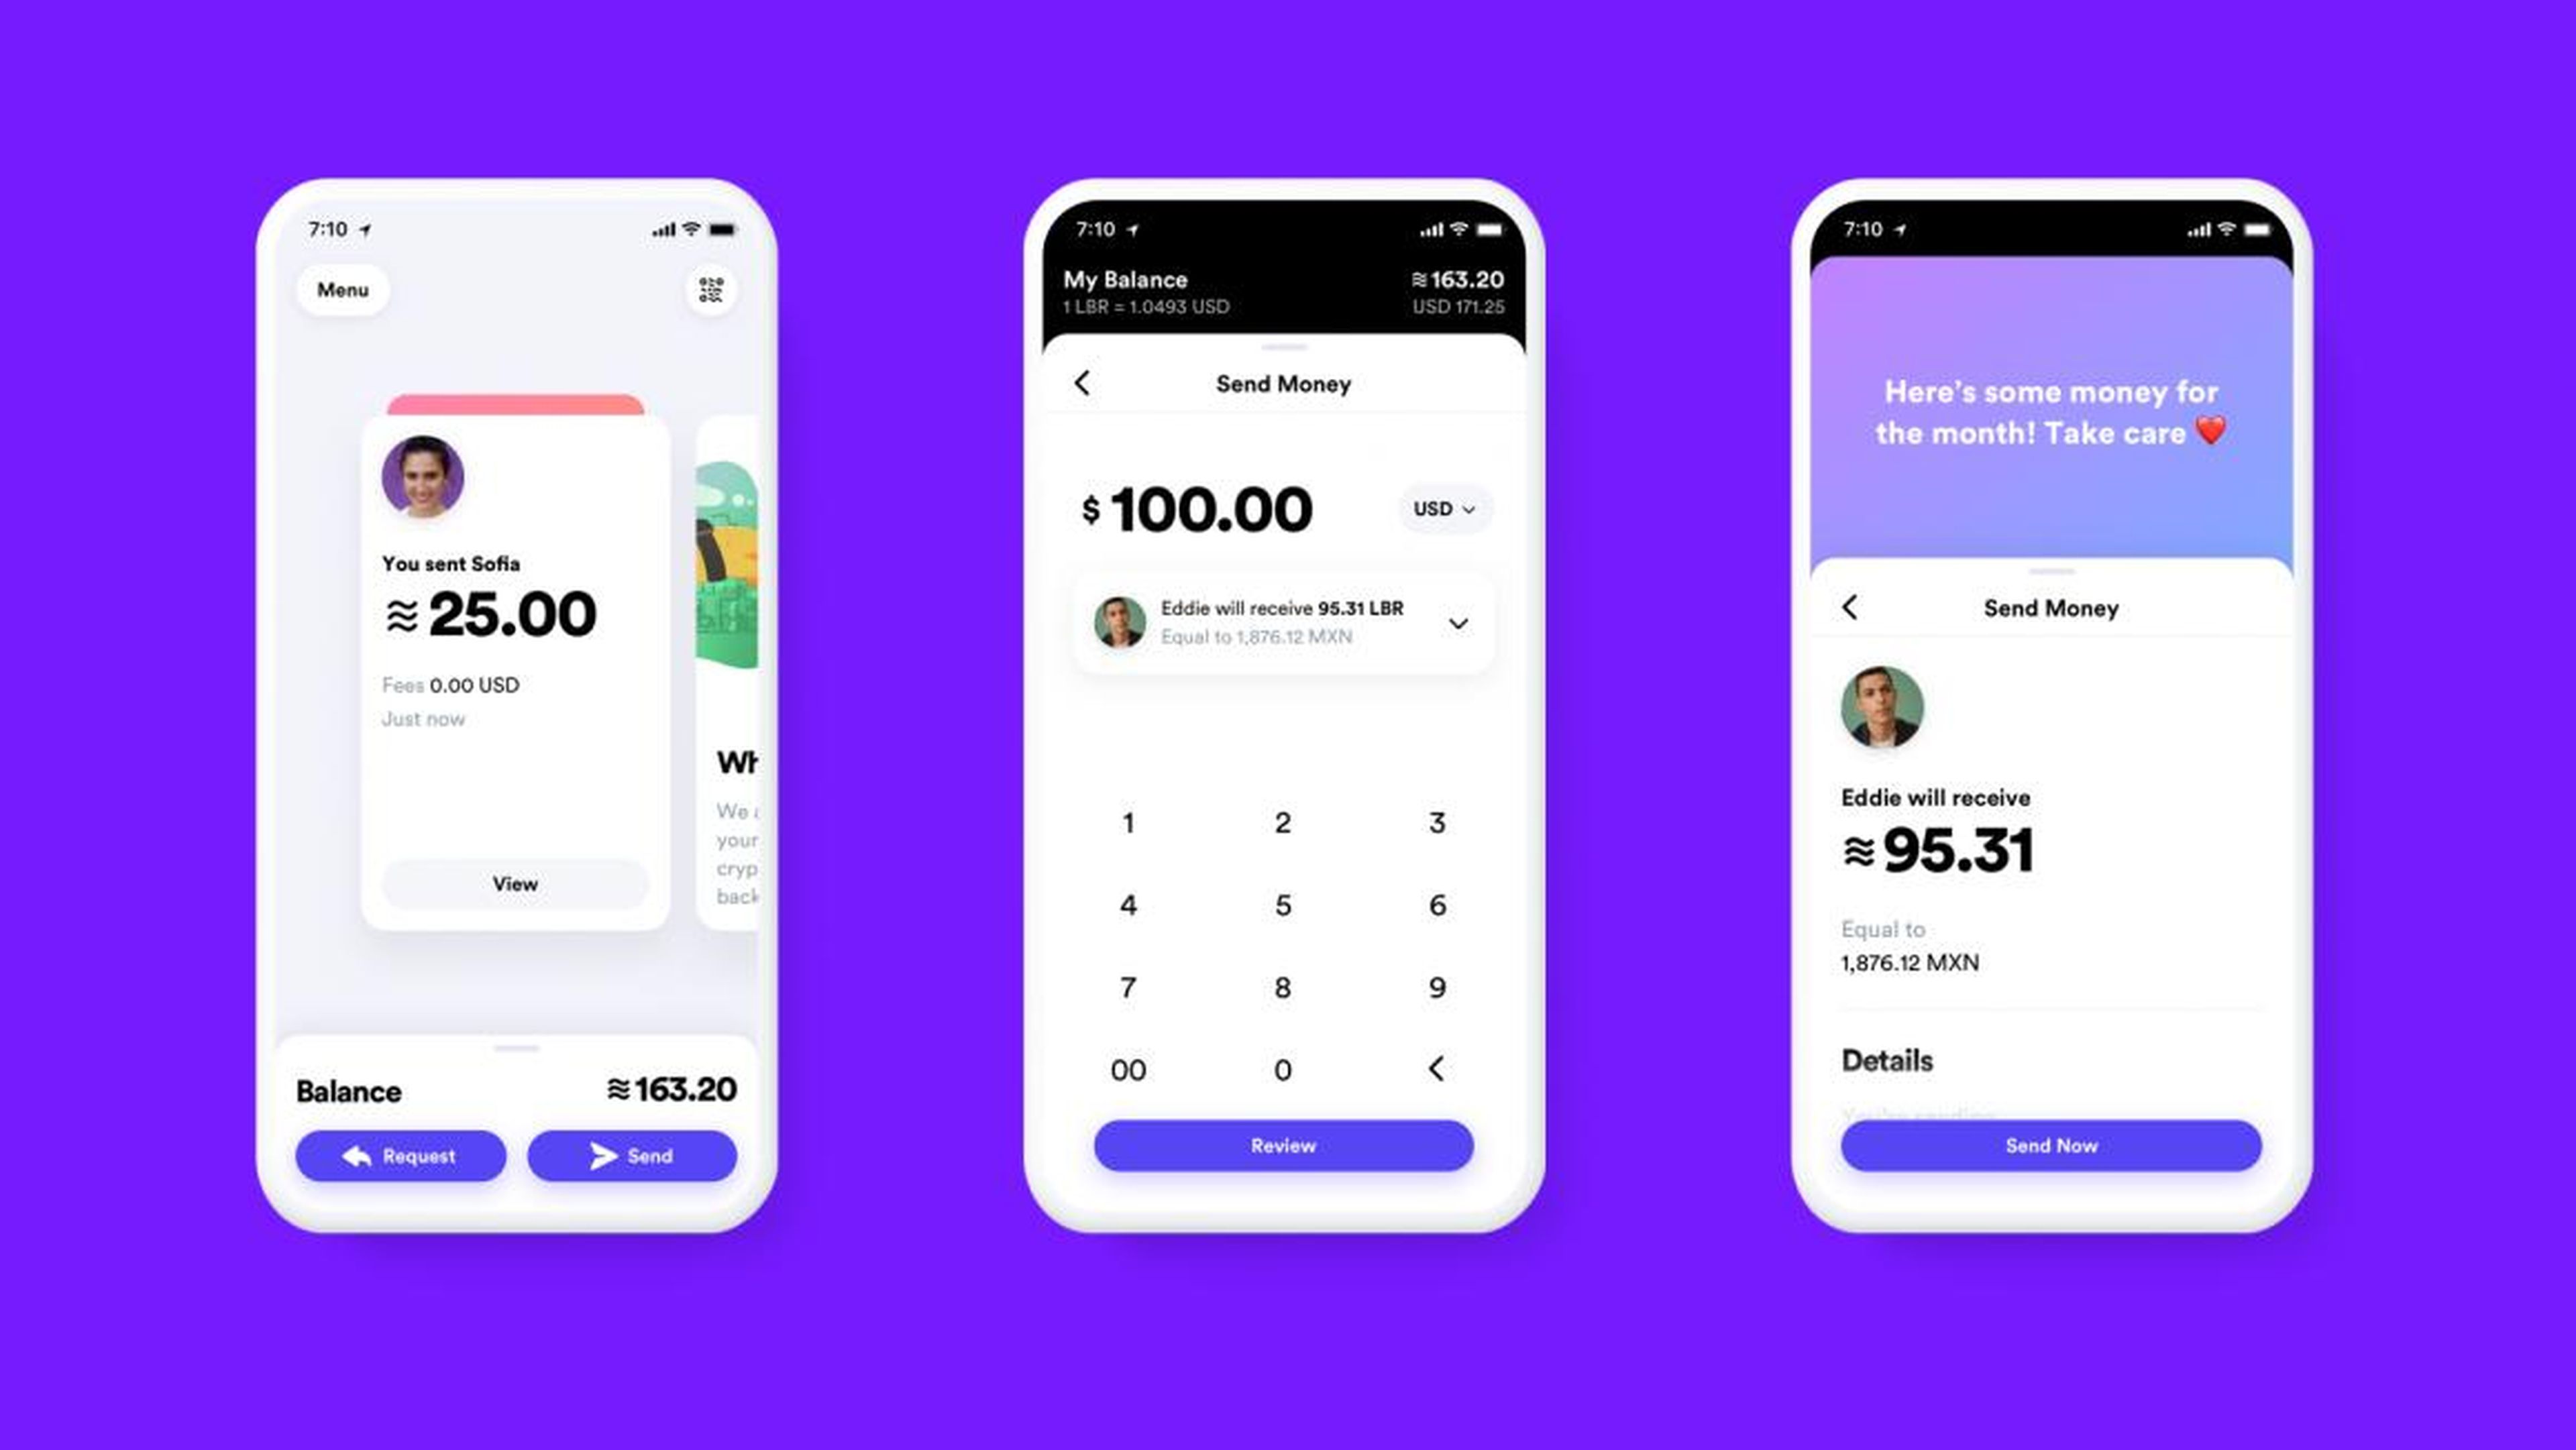 1. Libra will be accessible through Facebook Messenger, WhatsApp, and a standalone app